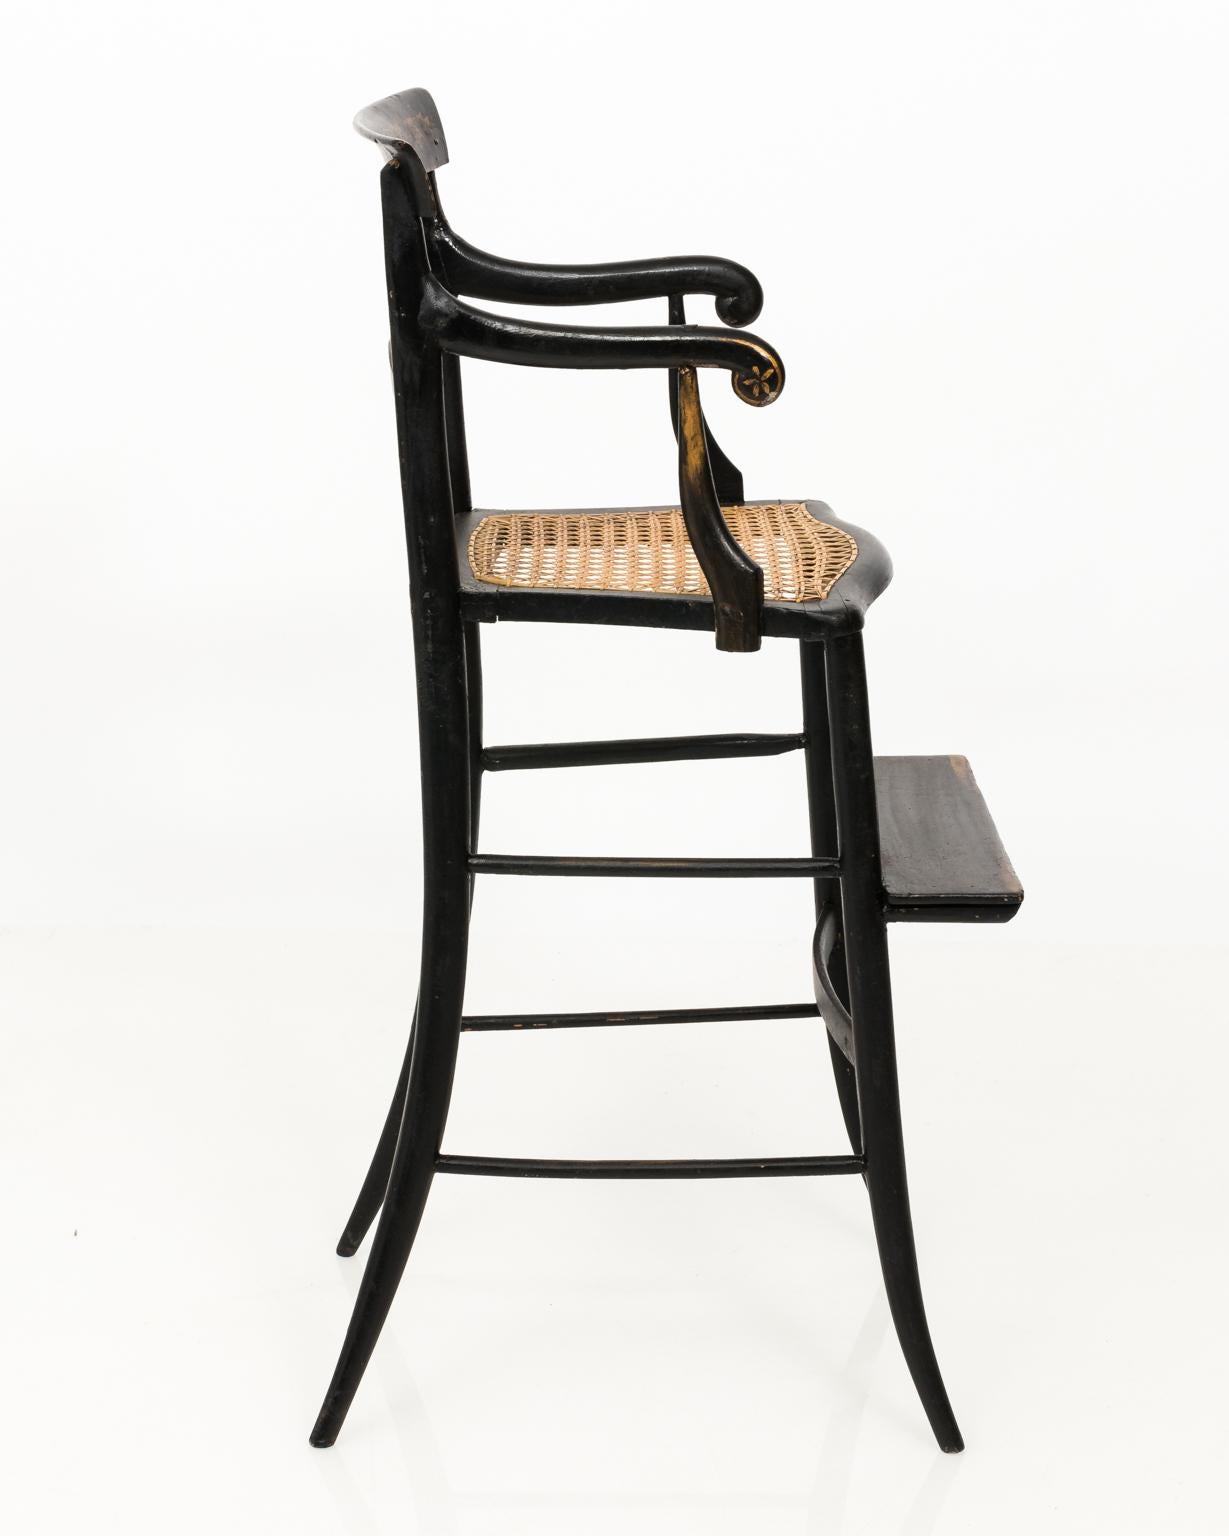 Black painted child's high chair with gold painted foliage on the seat back, scrolled arms, and a woven wicker seat, circa 19th century.